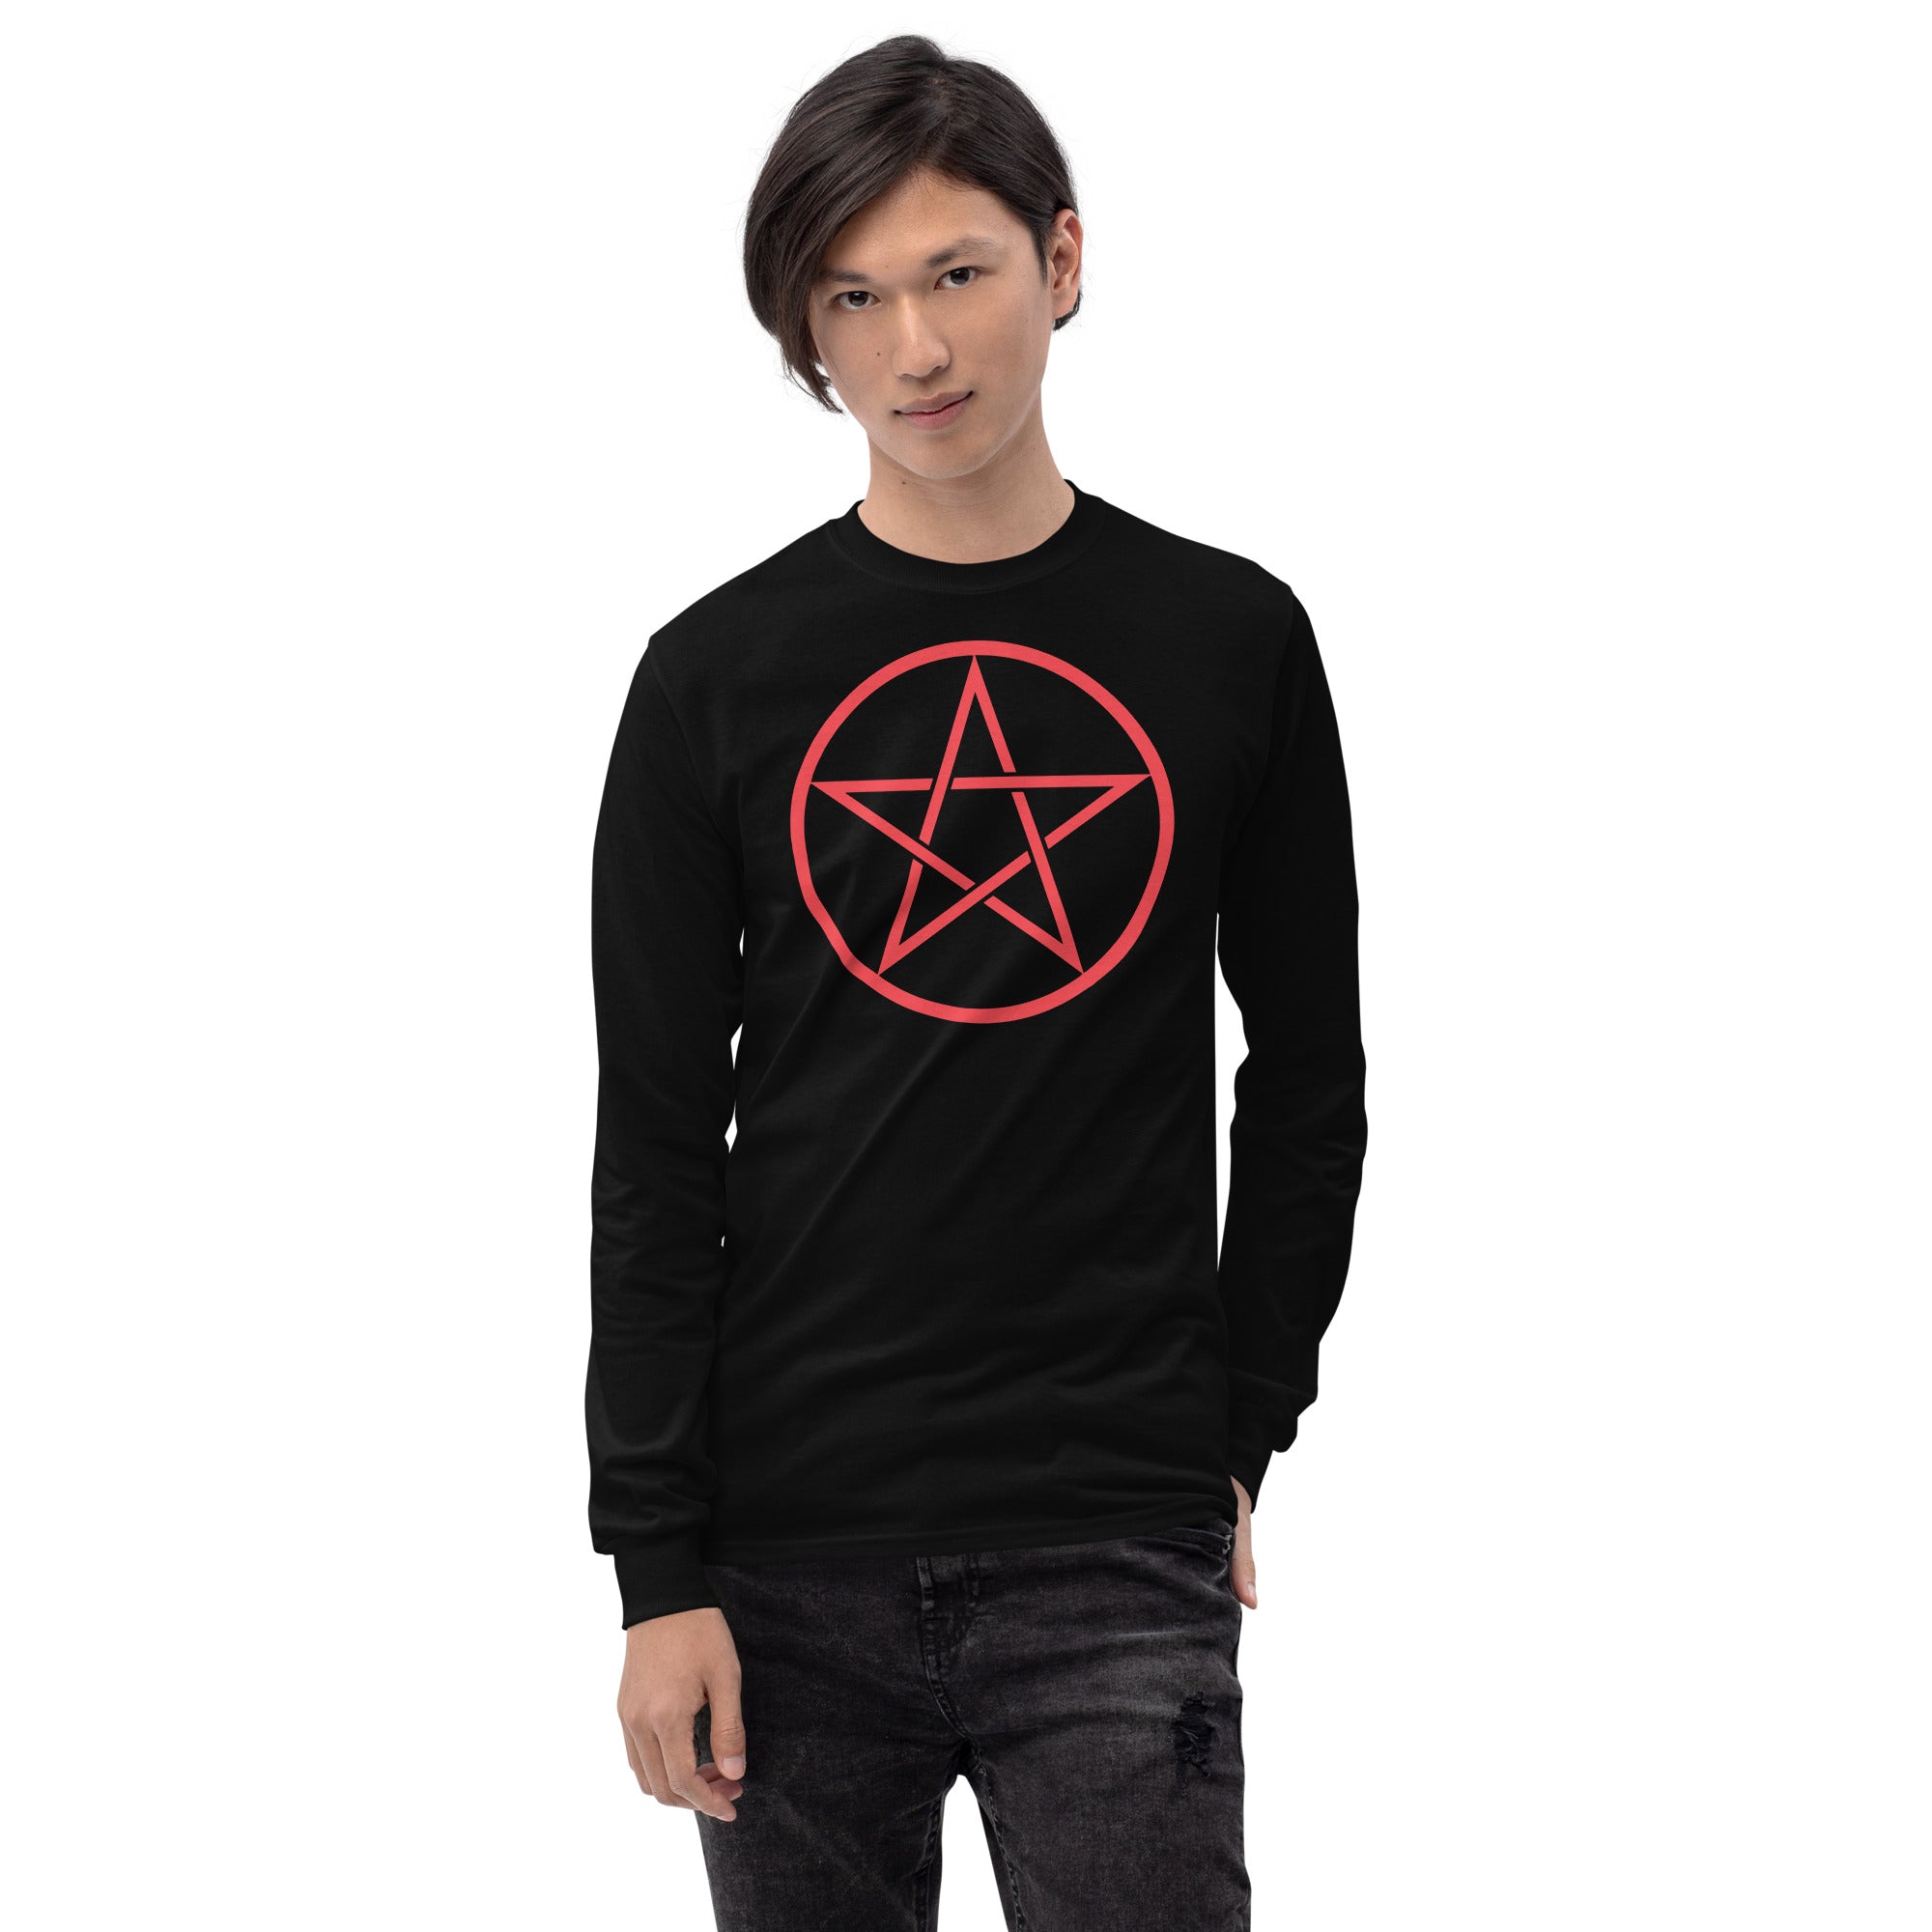 Red Goth Wiccan Woven Pentagram Long Sleeve Shirt - Edge of Life Designs